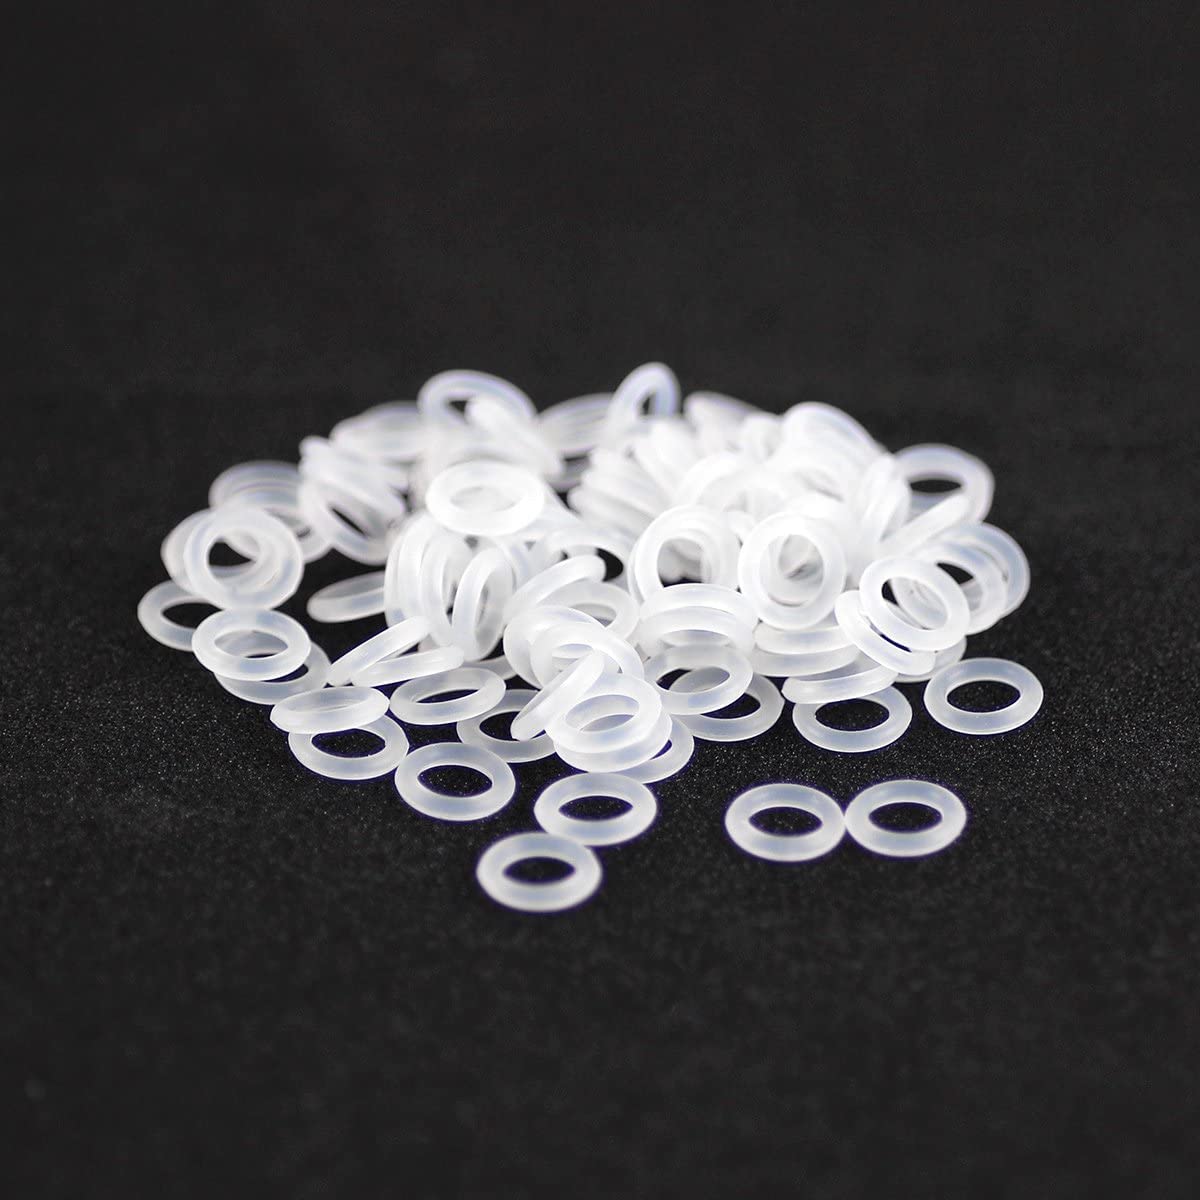 BodyJewelryOnline 16G O-Ring White Rubber Perfect for Tunnels Plugs and Tapers, Also for Any Piercing Retainer Eyebrow, Labret, Industrial, Cartilage Pack of 20